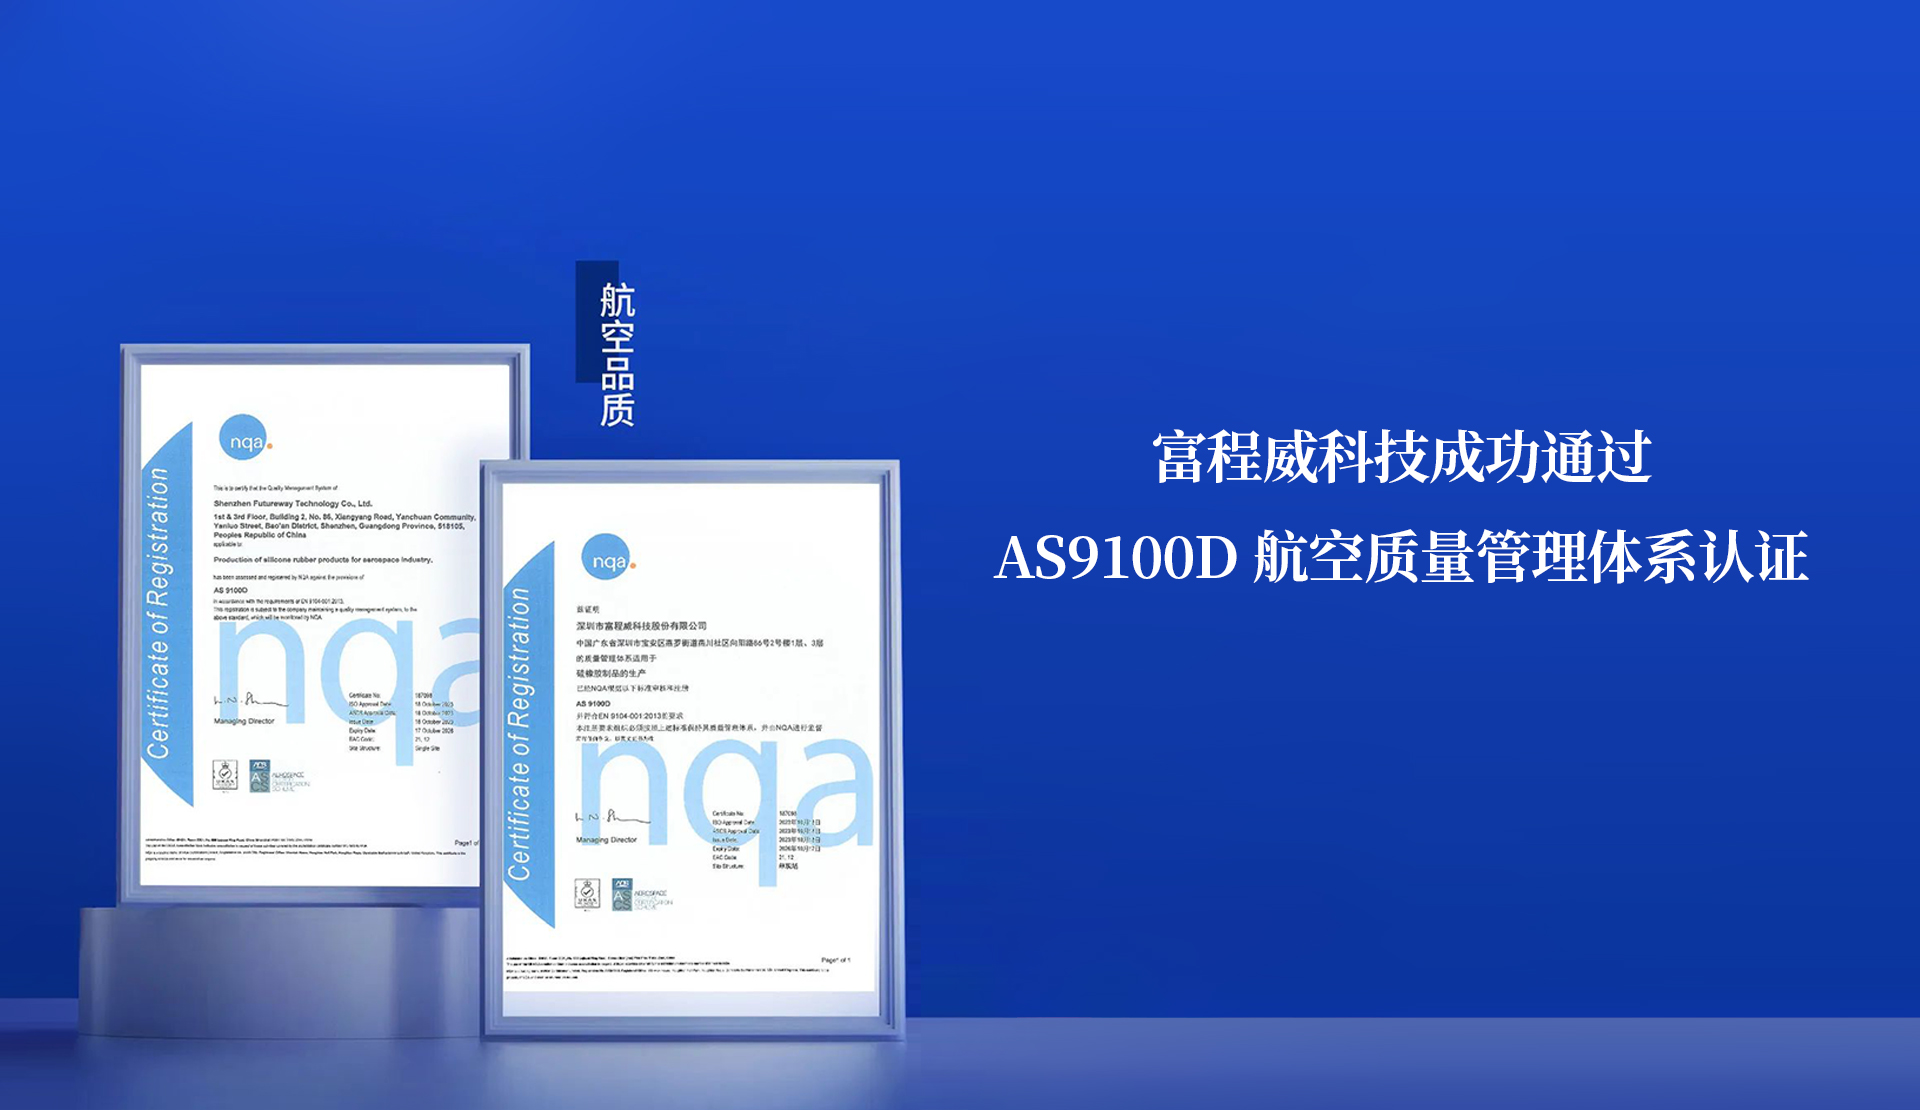 Good News! Futureway Technology Successfully Passed The AS9100D Aerospace Quality Management System Certification